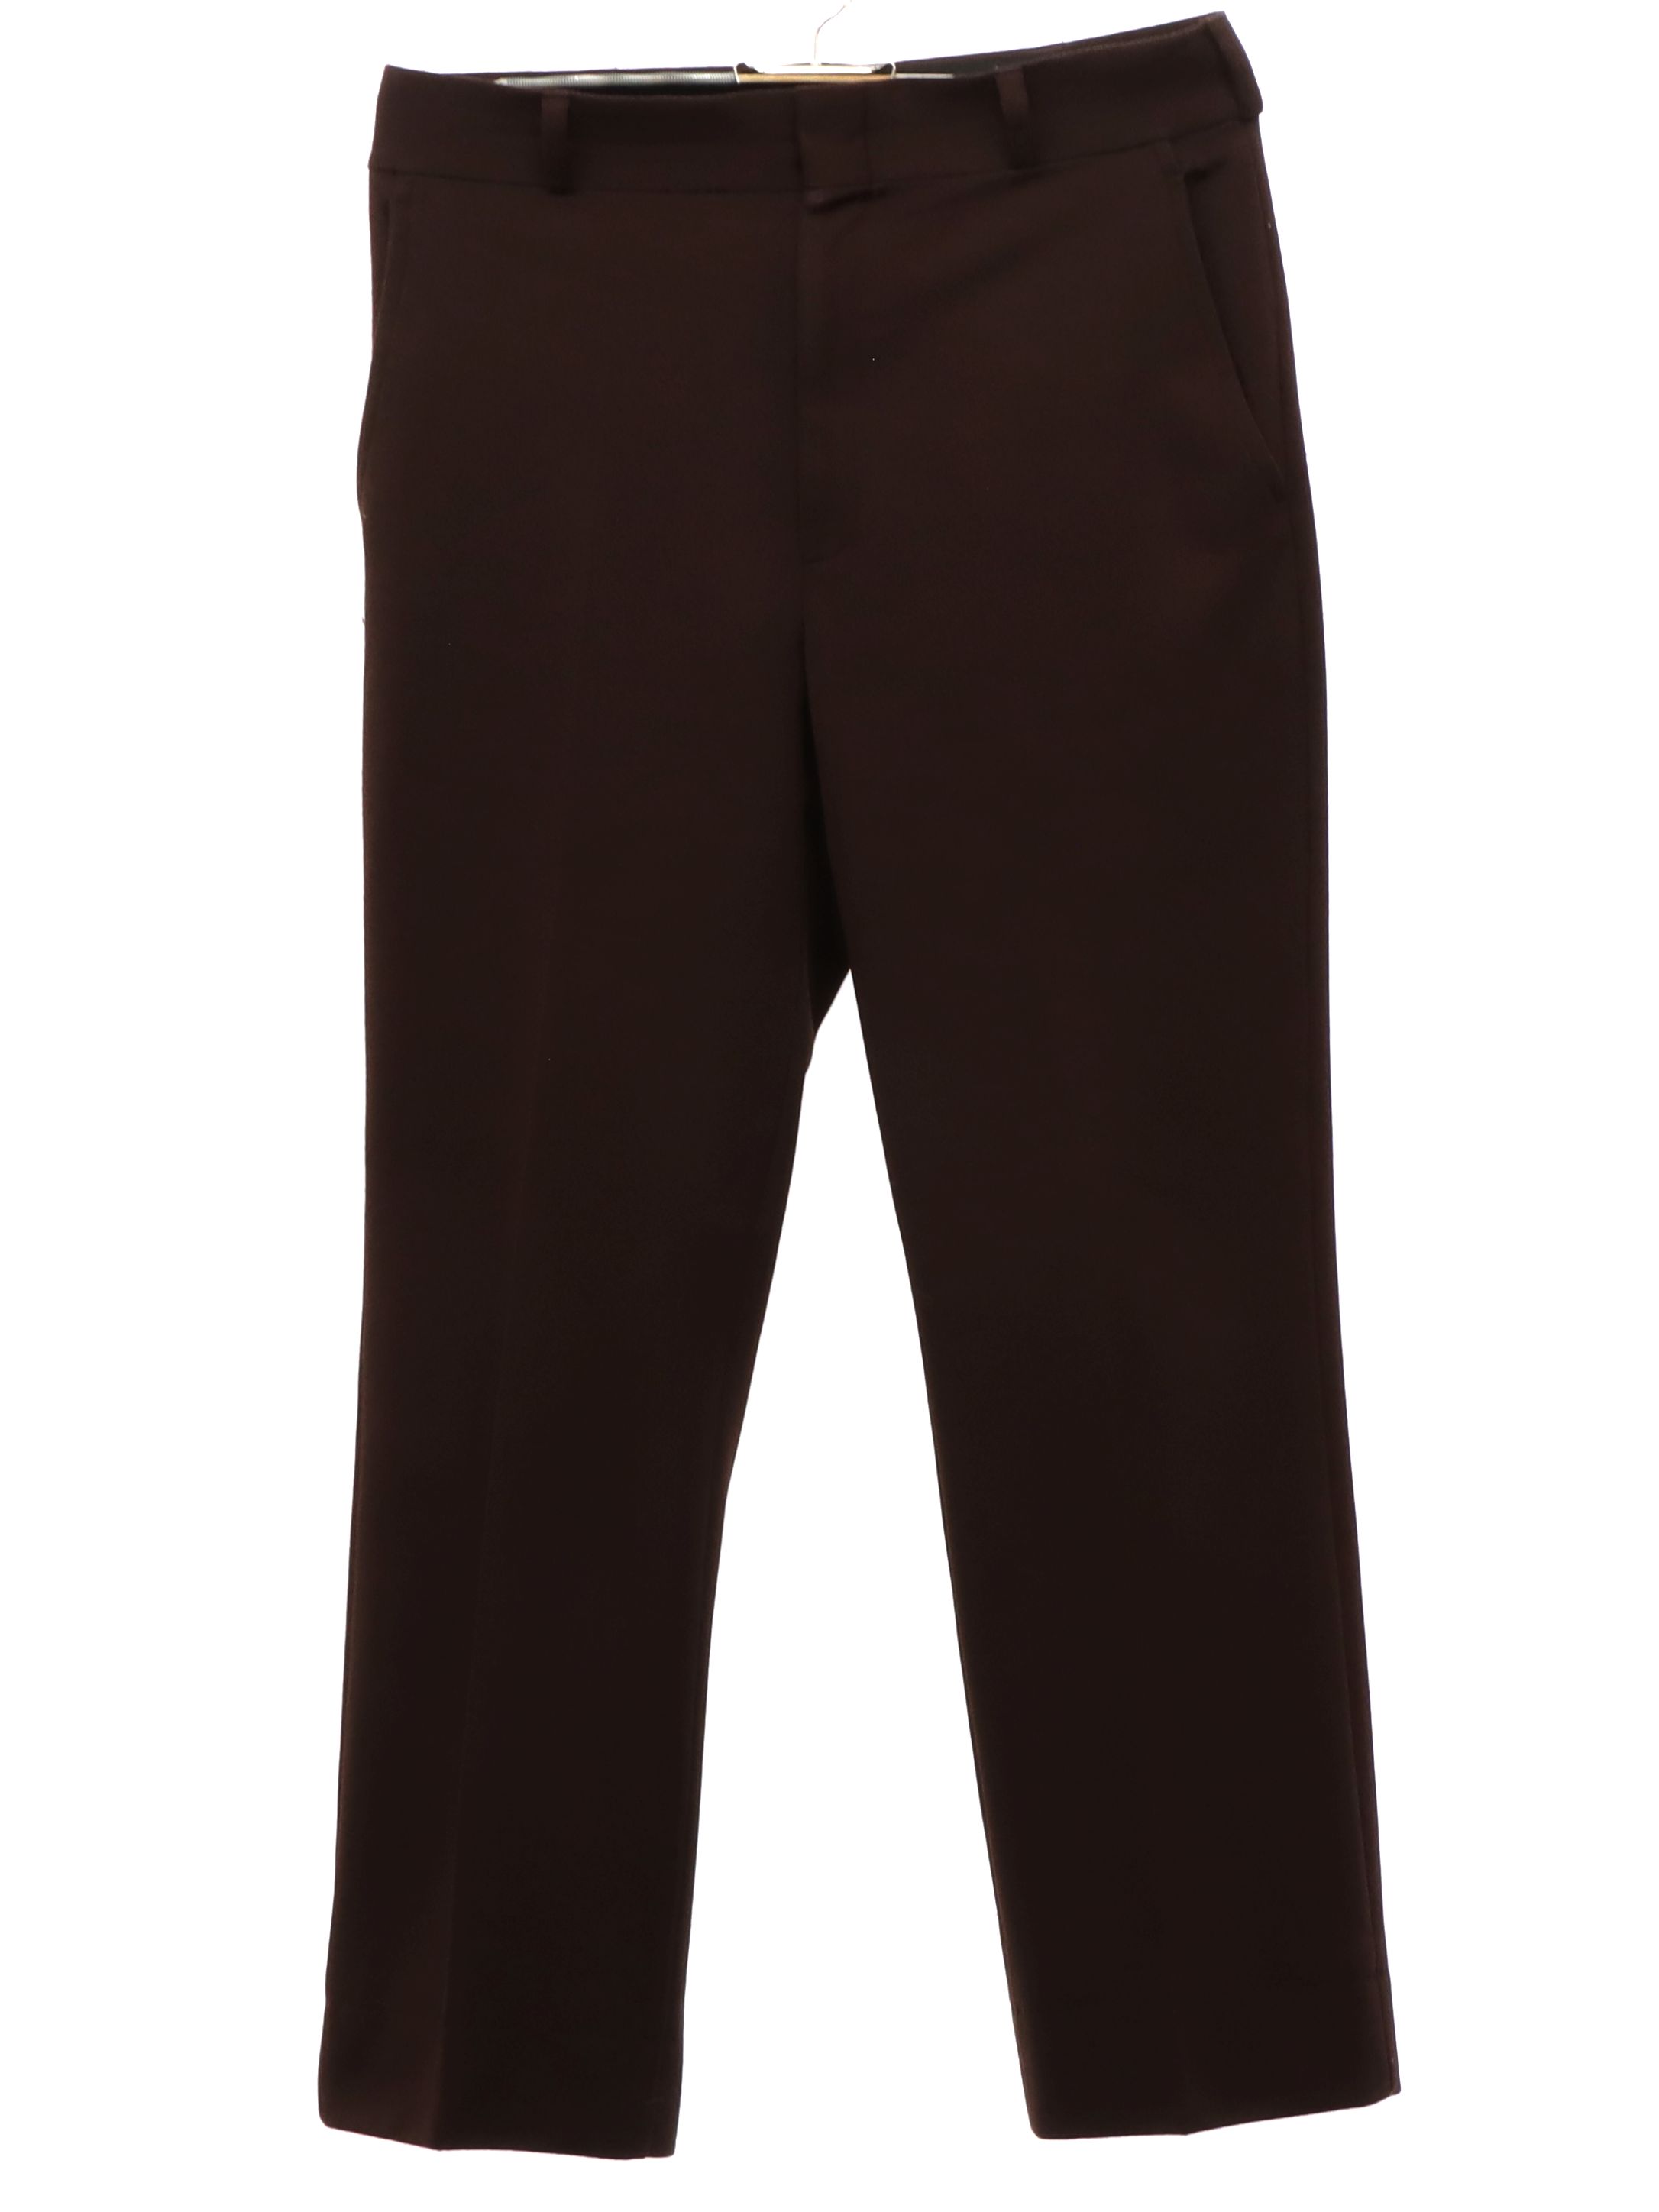 70's Haband Pants: 70s -Haband- Mens brown solid colored polyester ...